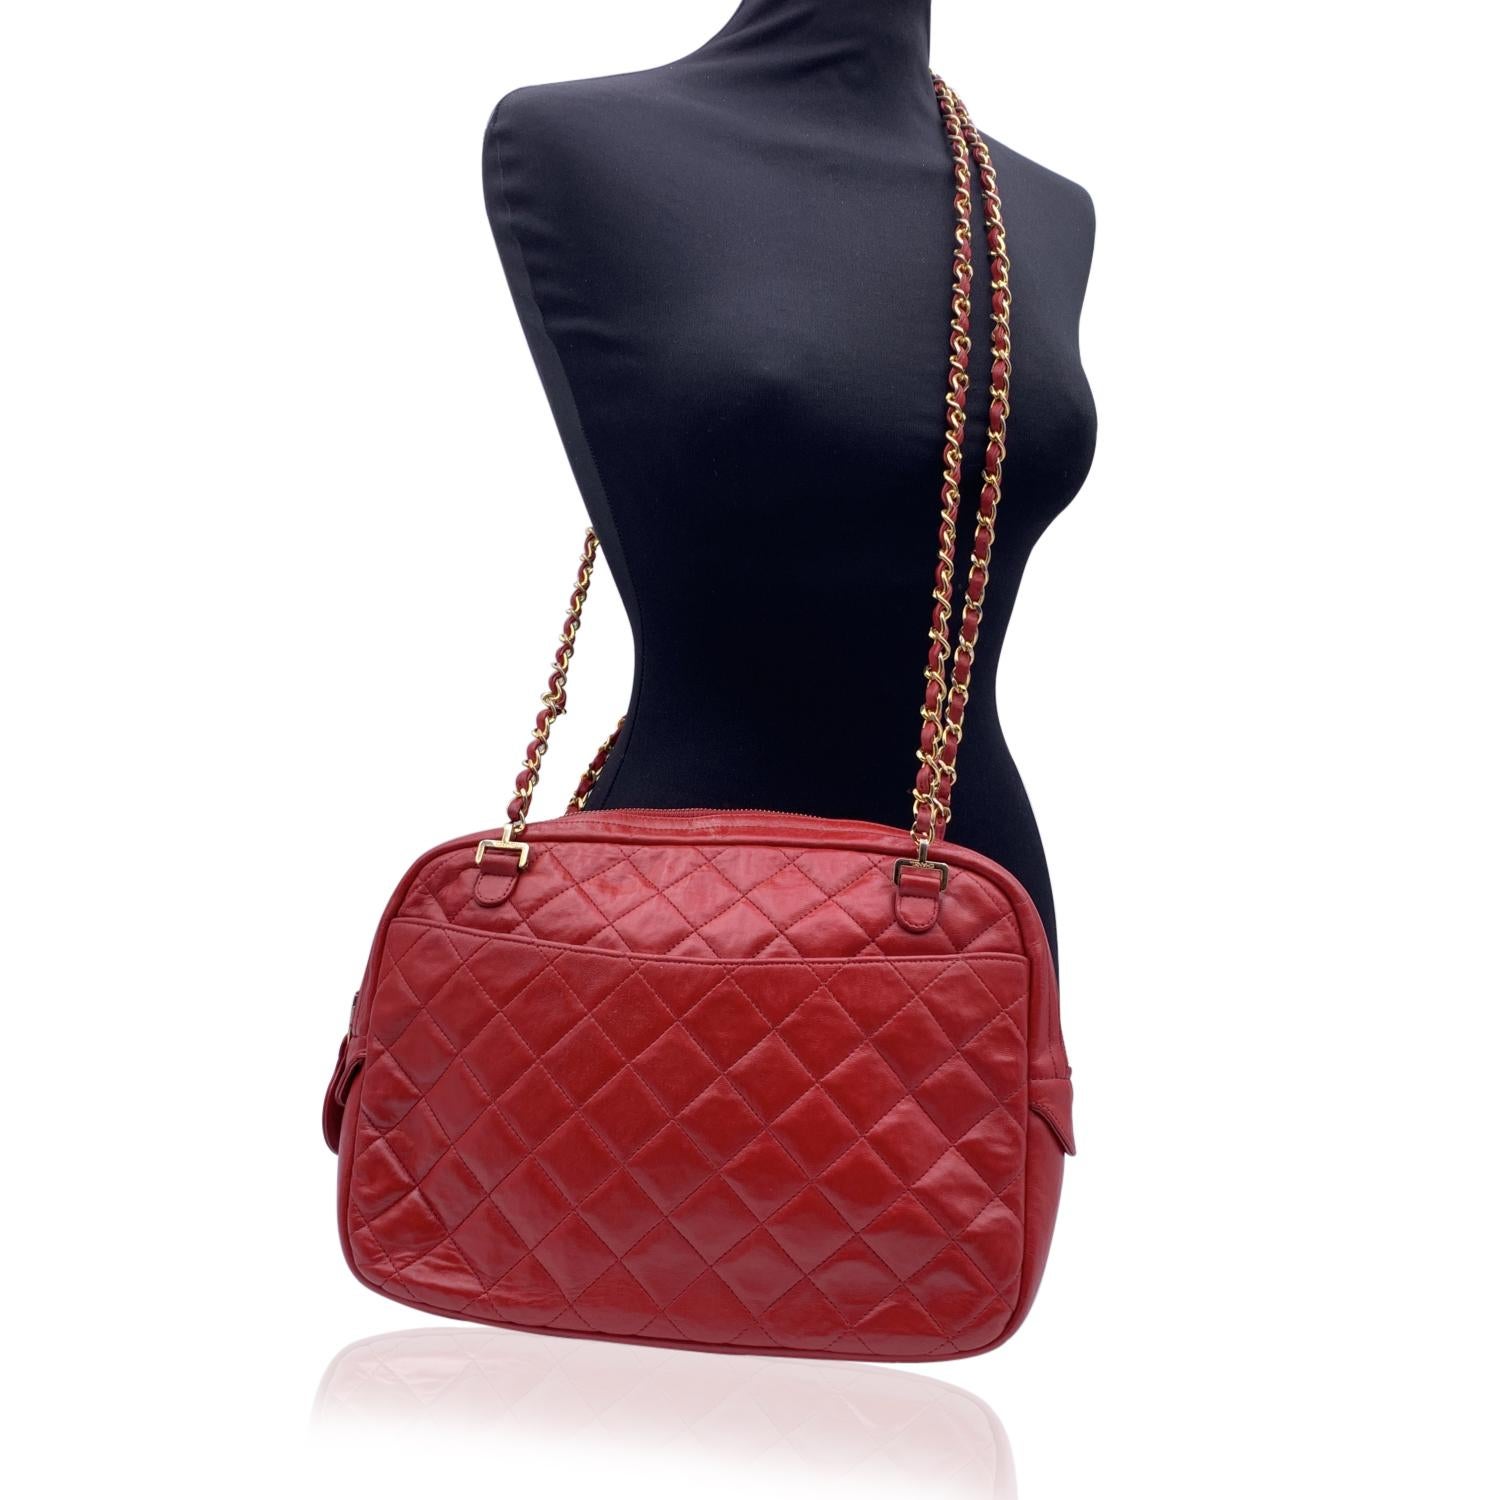 Vintage Chanel Quilted 'Camera Bag' Shoulder Bag in red color from 1991 circa. Features upper zipper closure, CC - CHANEL logo zipper pull, front and rear open compartment and gold metal chain straps with interwoven leather. Red leather lining with